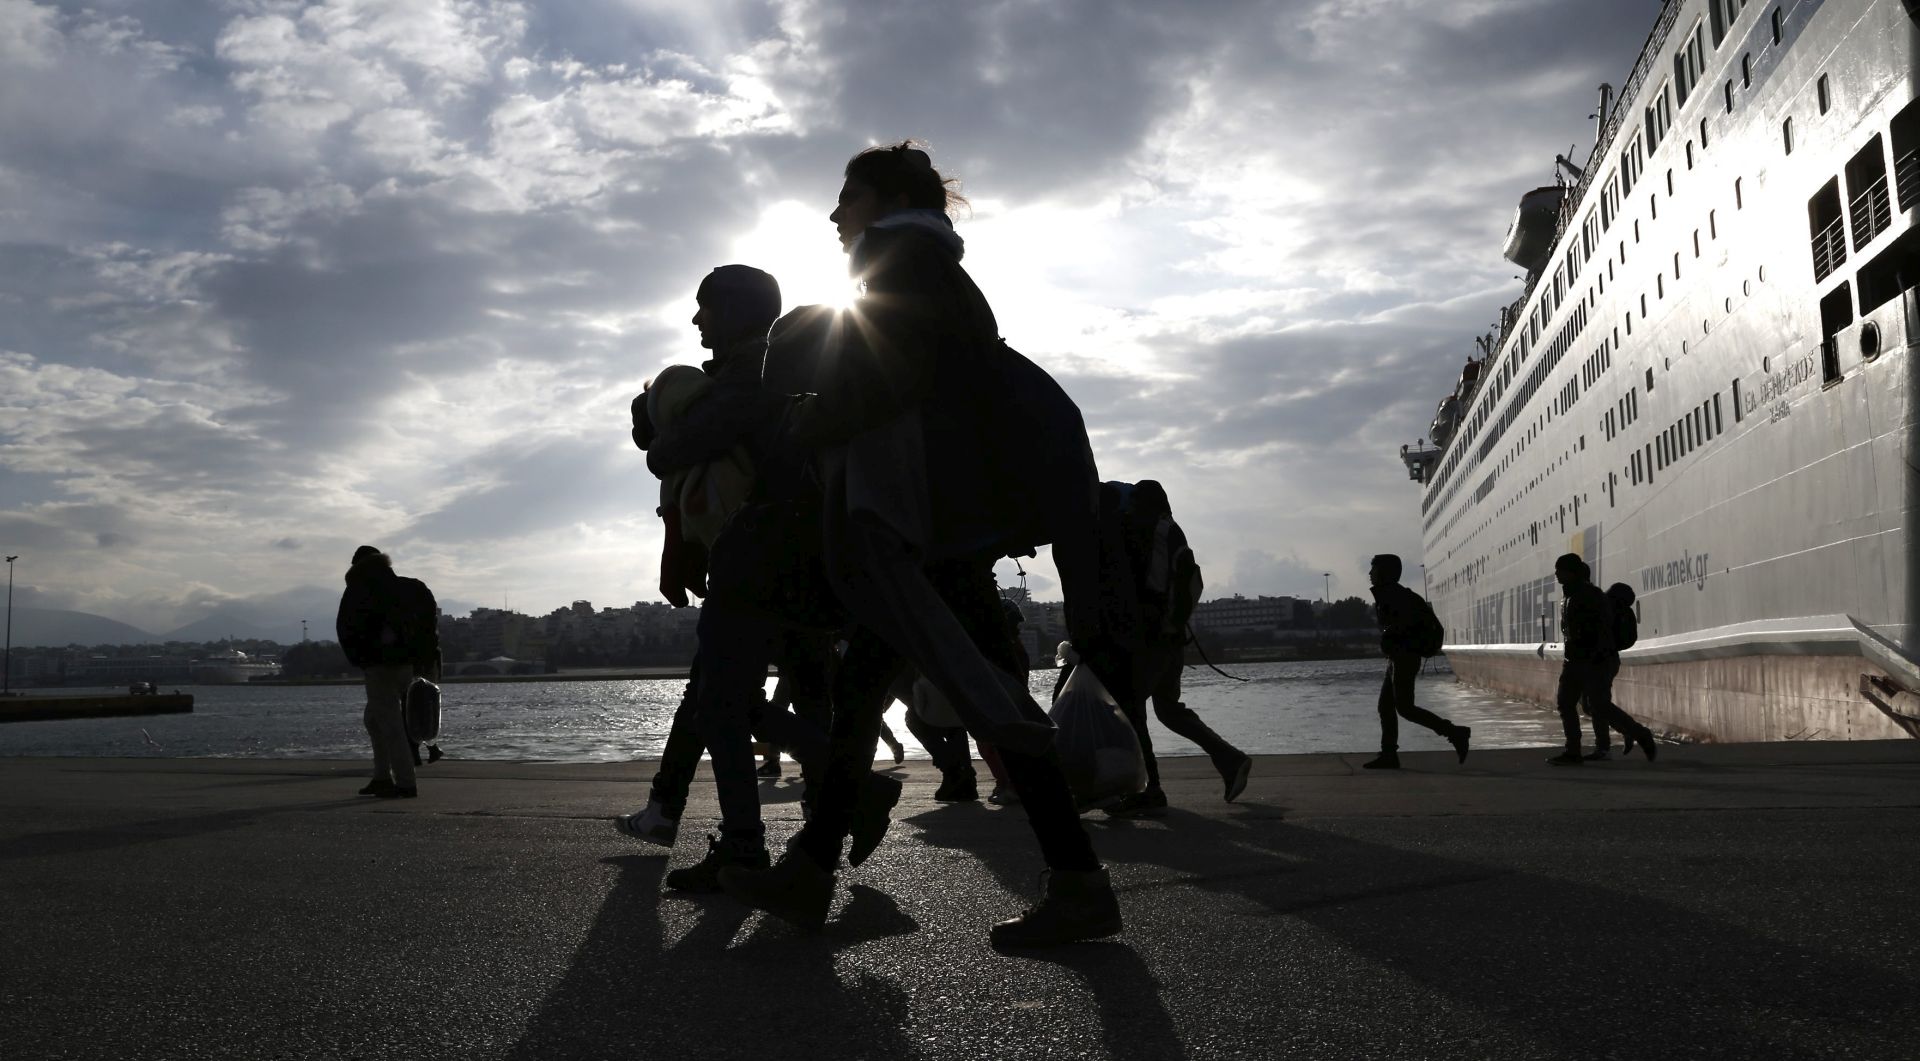 epa05120126 Refugees and migrants walk after disembarking from the ferry 'Eletherios Venizelos' at the port of Piraeus, near Athens, Greece, 23 January 2016. The ship 'Eleftherios Venizelos' arrived at the port of Piraeus carrying about 2,500 refugees and migrants that had landed on the Greek island of Myilene, coming from Turkey. Thousands of migrants continue to arrive on the Greek islands, after having crossed the Aegean sea, on their way to the European Union countries.  EPA/YANNIS KOLESIDIS